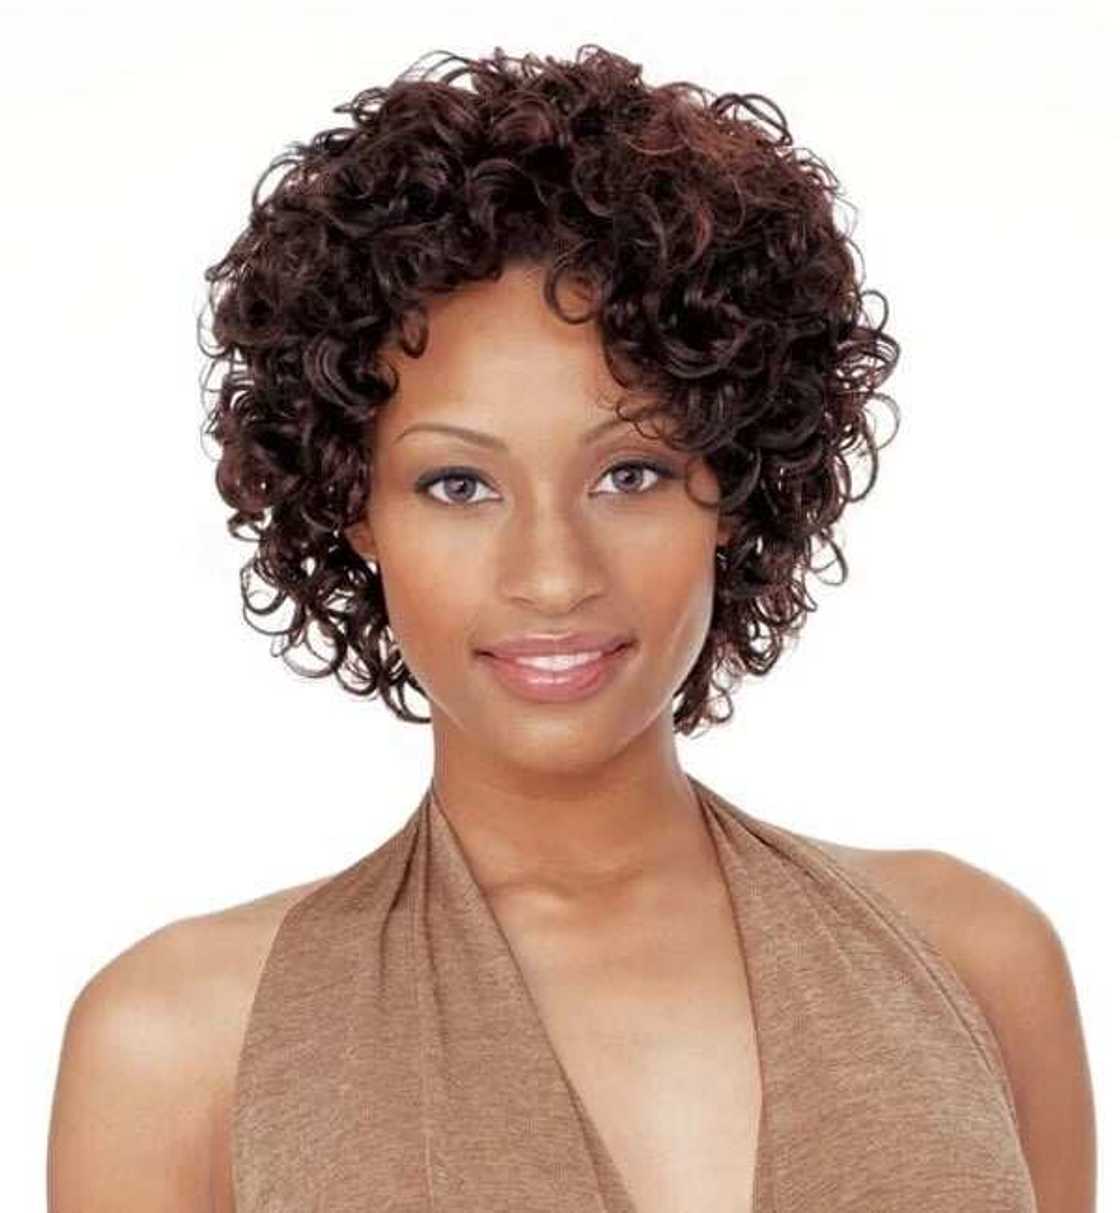 weave hairstyles with braids
weave hairstyles for natural hair
weave hairstyles for short natural hair